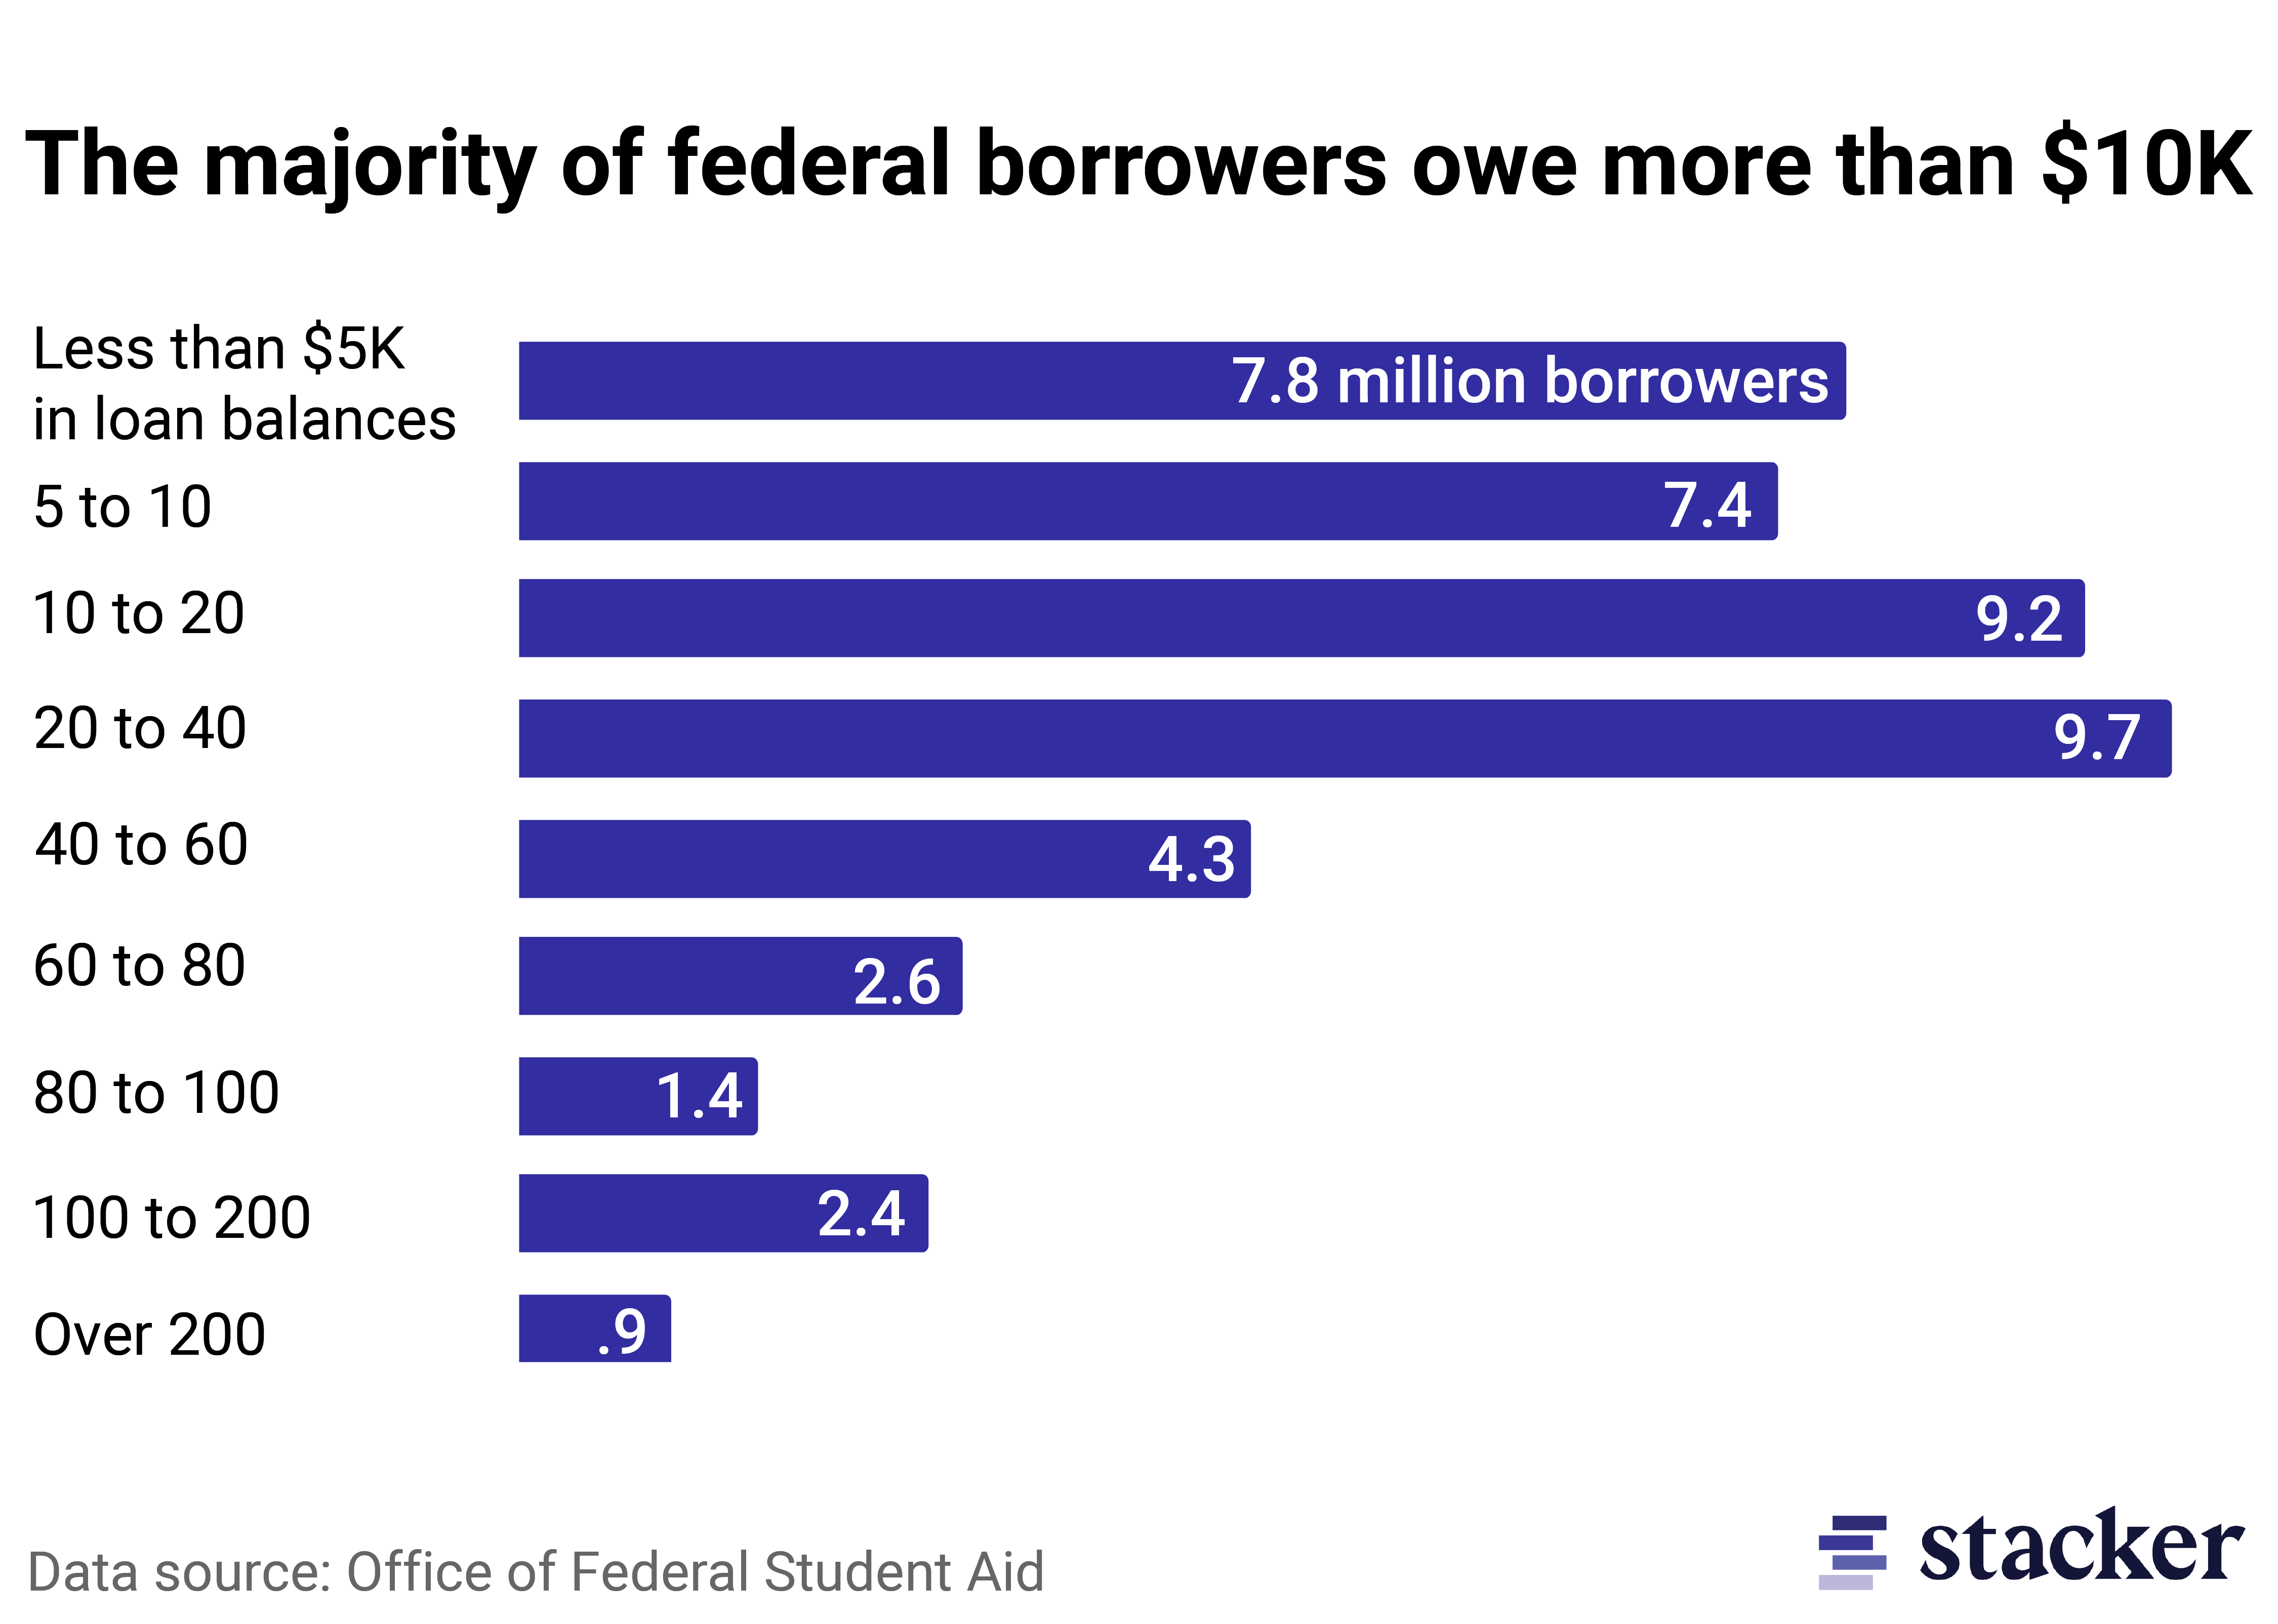 Bar chart showing the number federal student loans broken down by different amounts